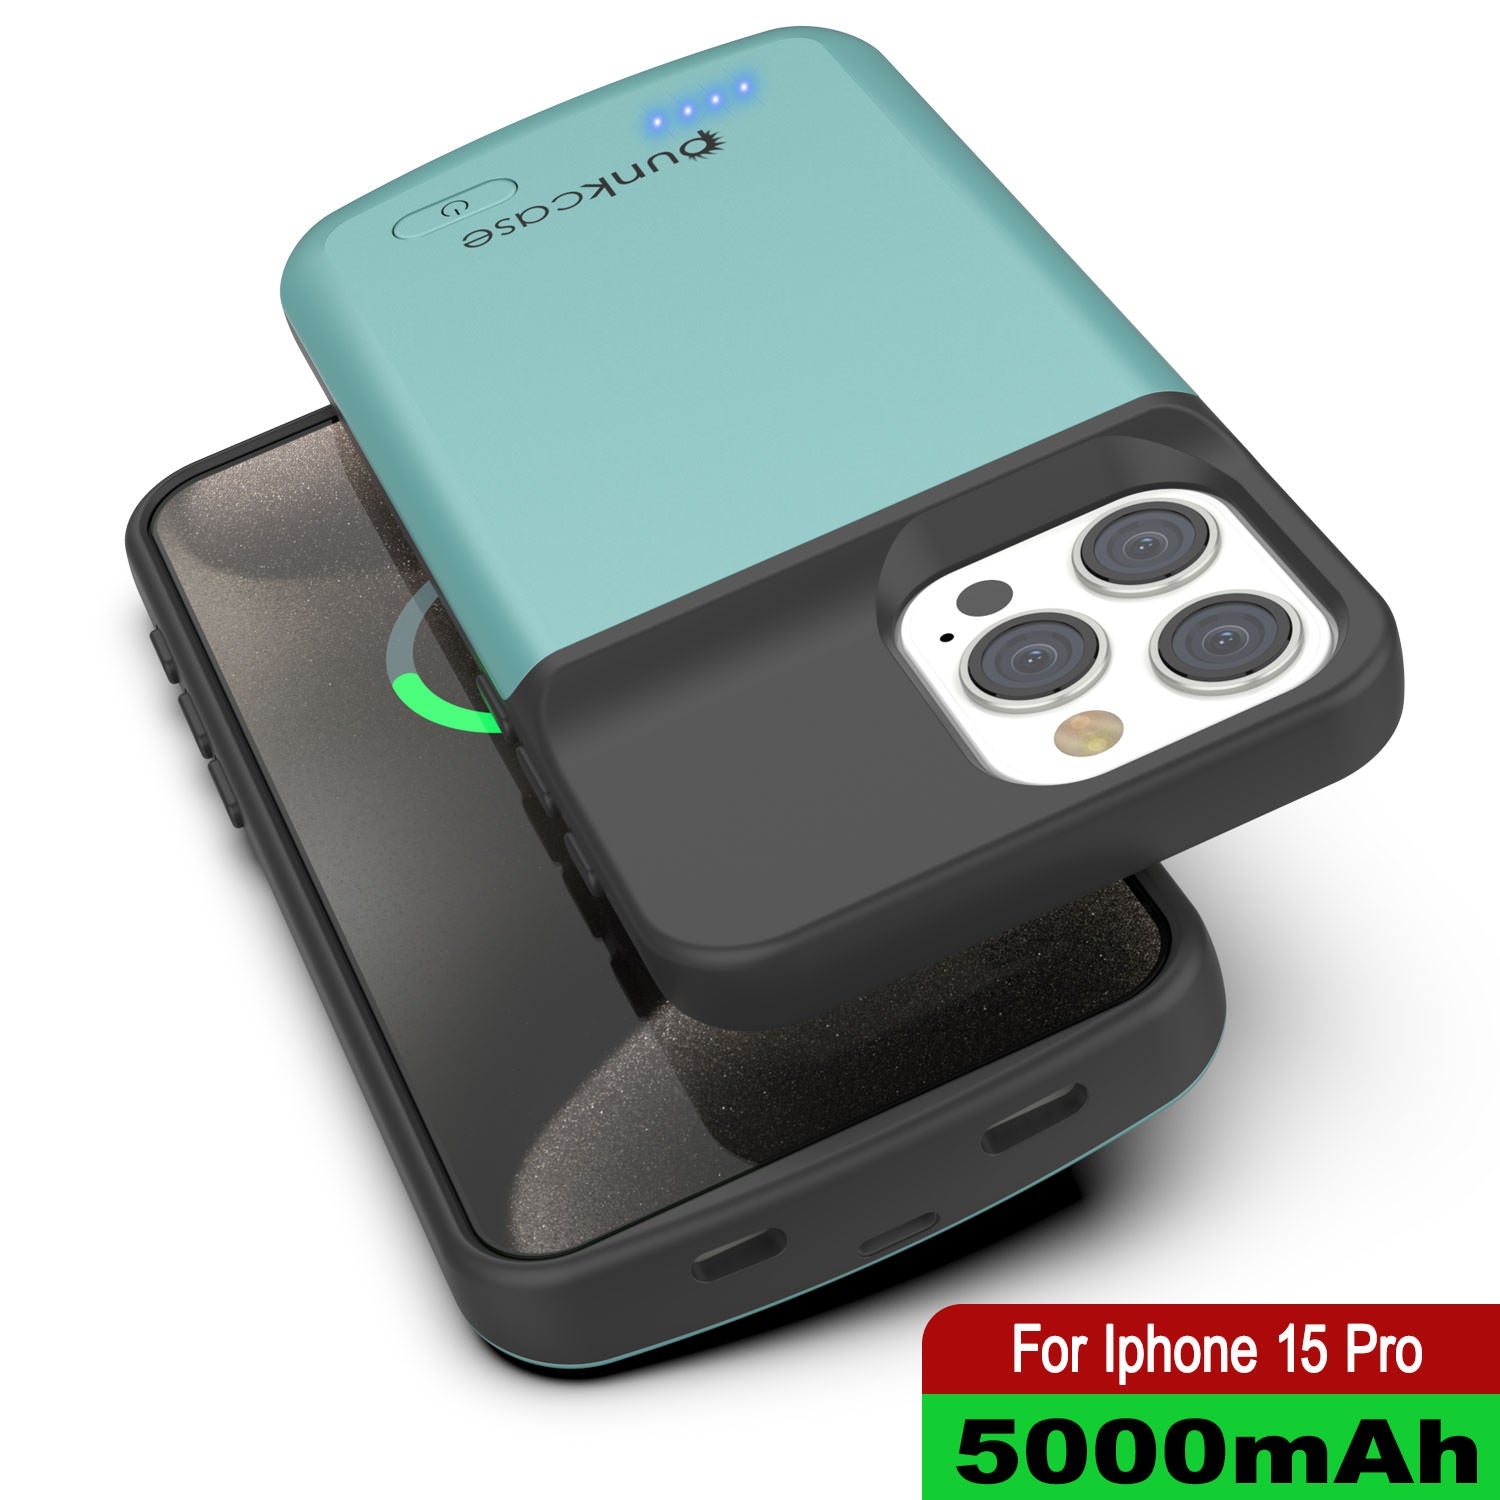 iPhone 15 Pro Battery Case, PunkJuice 5000mAH Fast Charging Power Bank W/ Screen Protector | [Teal]